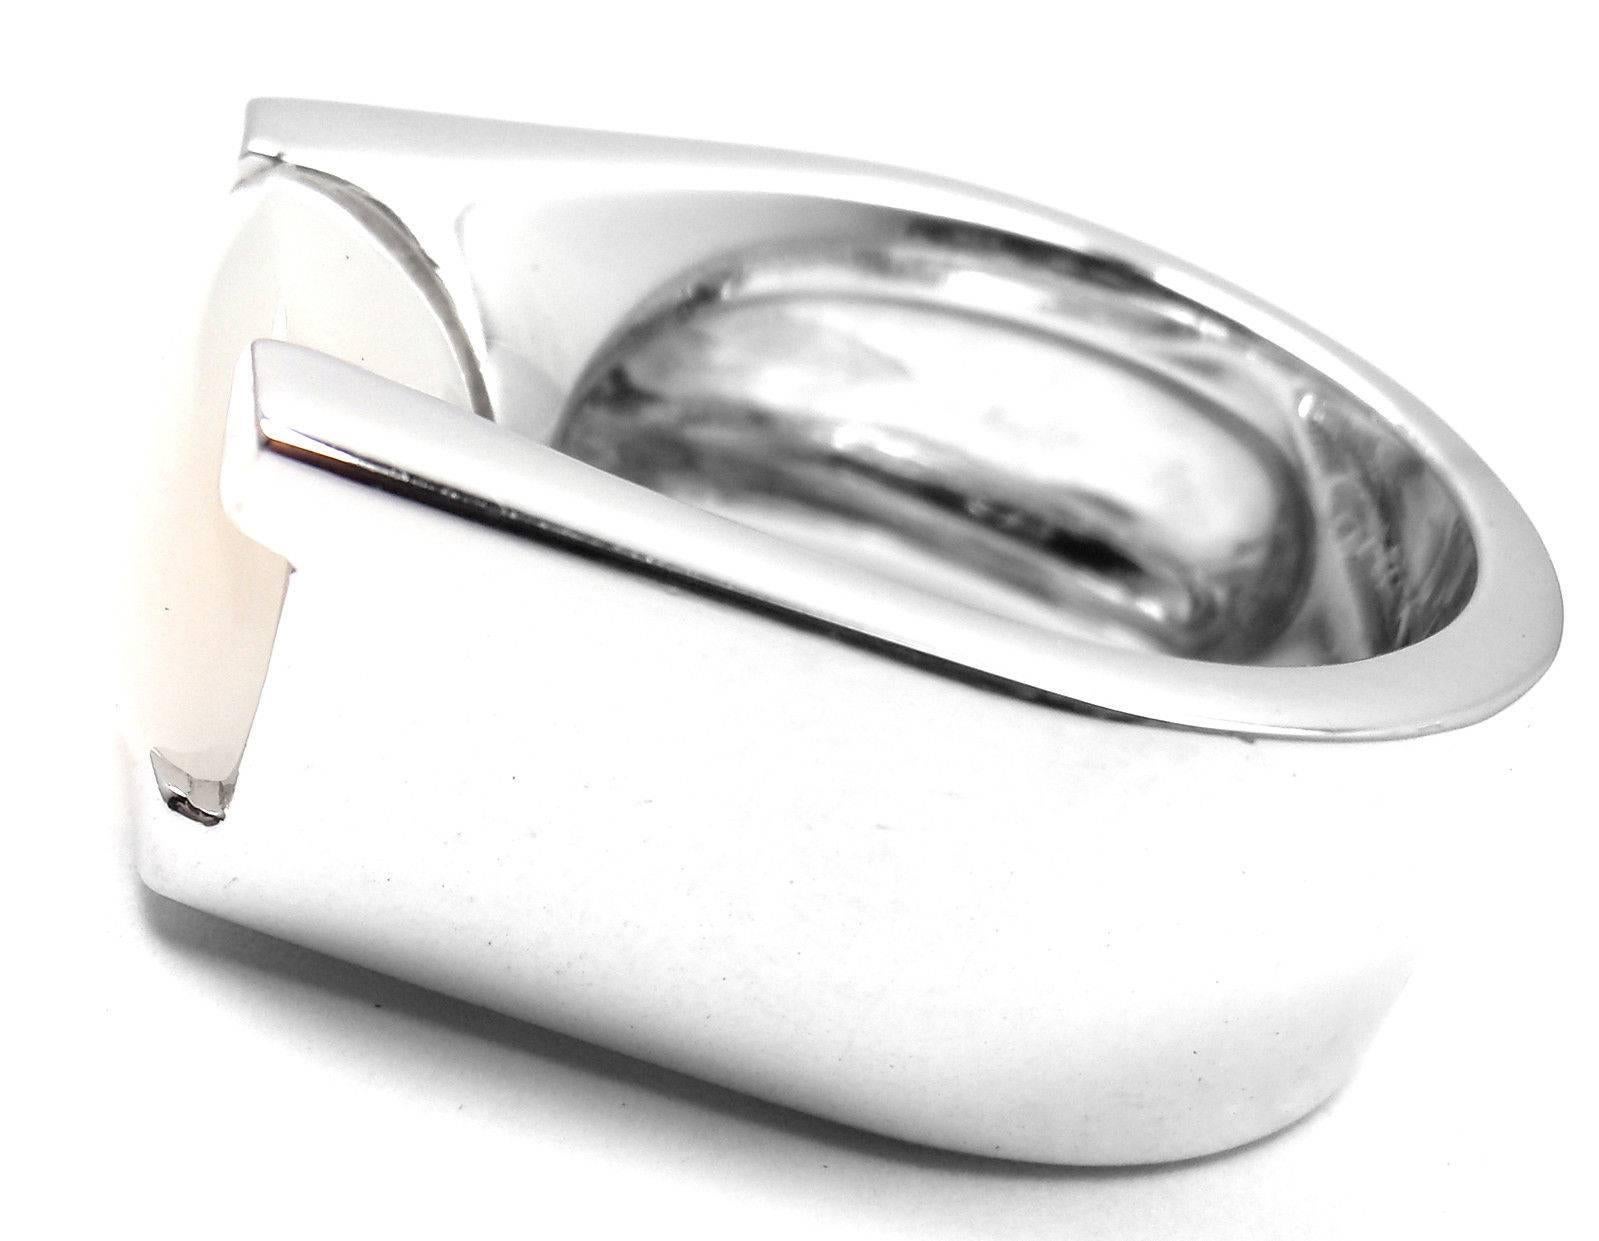 18k White Gold Large Moonstone Ring by Cartier. 
With 1 oval moonstone 10mm x 15mm. 
This beautiful ring comes with an original Cartier box.   

Details:  
Ring Size: 5 1/4 US, European 50
Weight: 19.3 grams
Width: 10mm
Stamped Hallmarks: Cartier